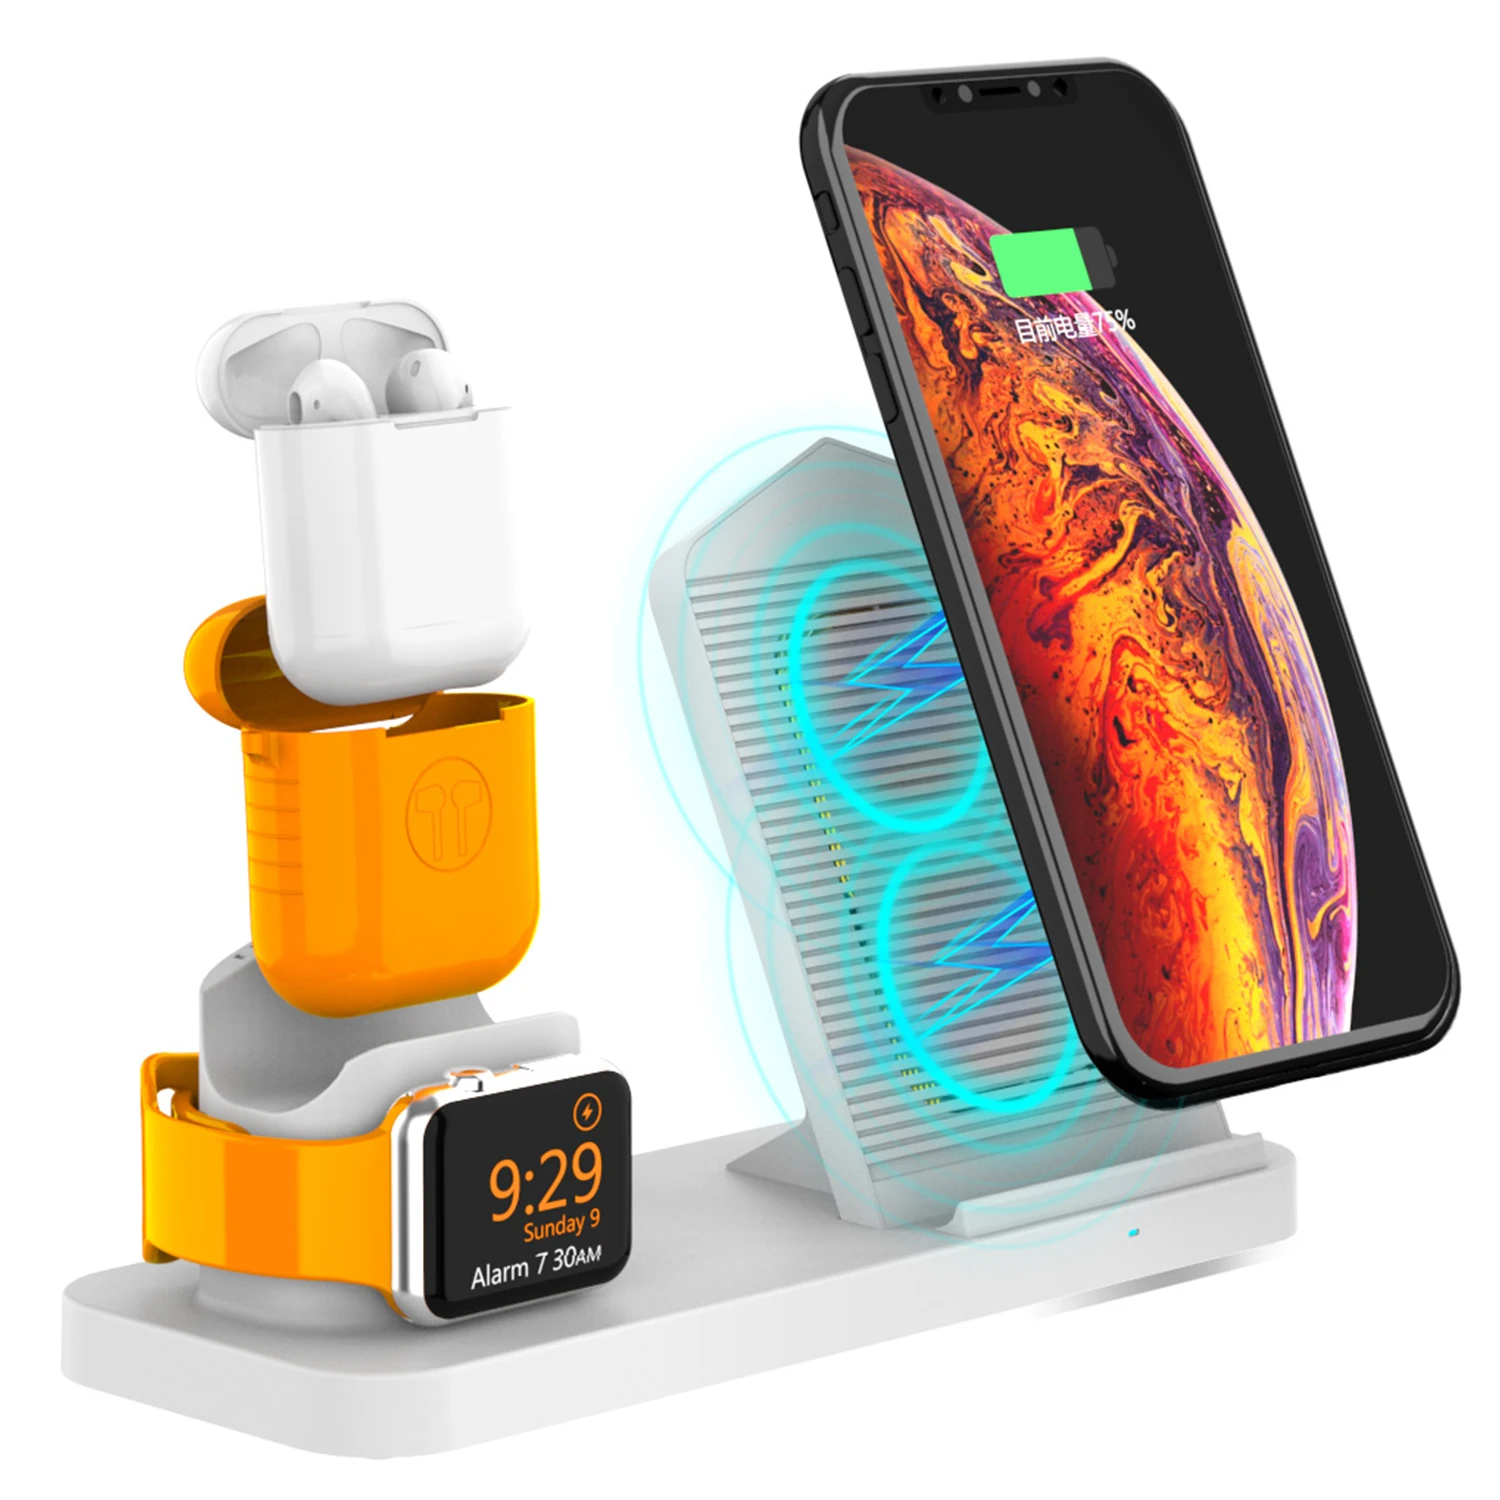 

Besegad 3 in 1 Wireless Charging Holder Dock Station Charger Stand with Cooling Fan for Apple Watch iWatch 4 AirPods iPhone